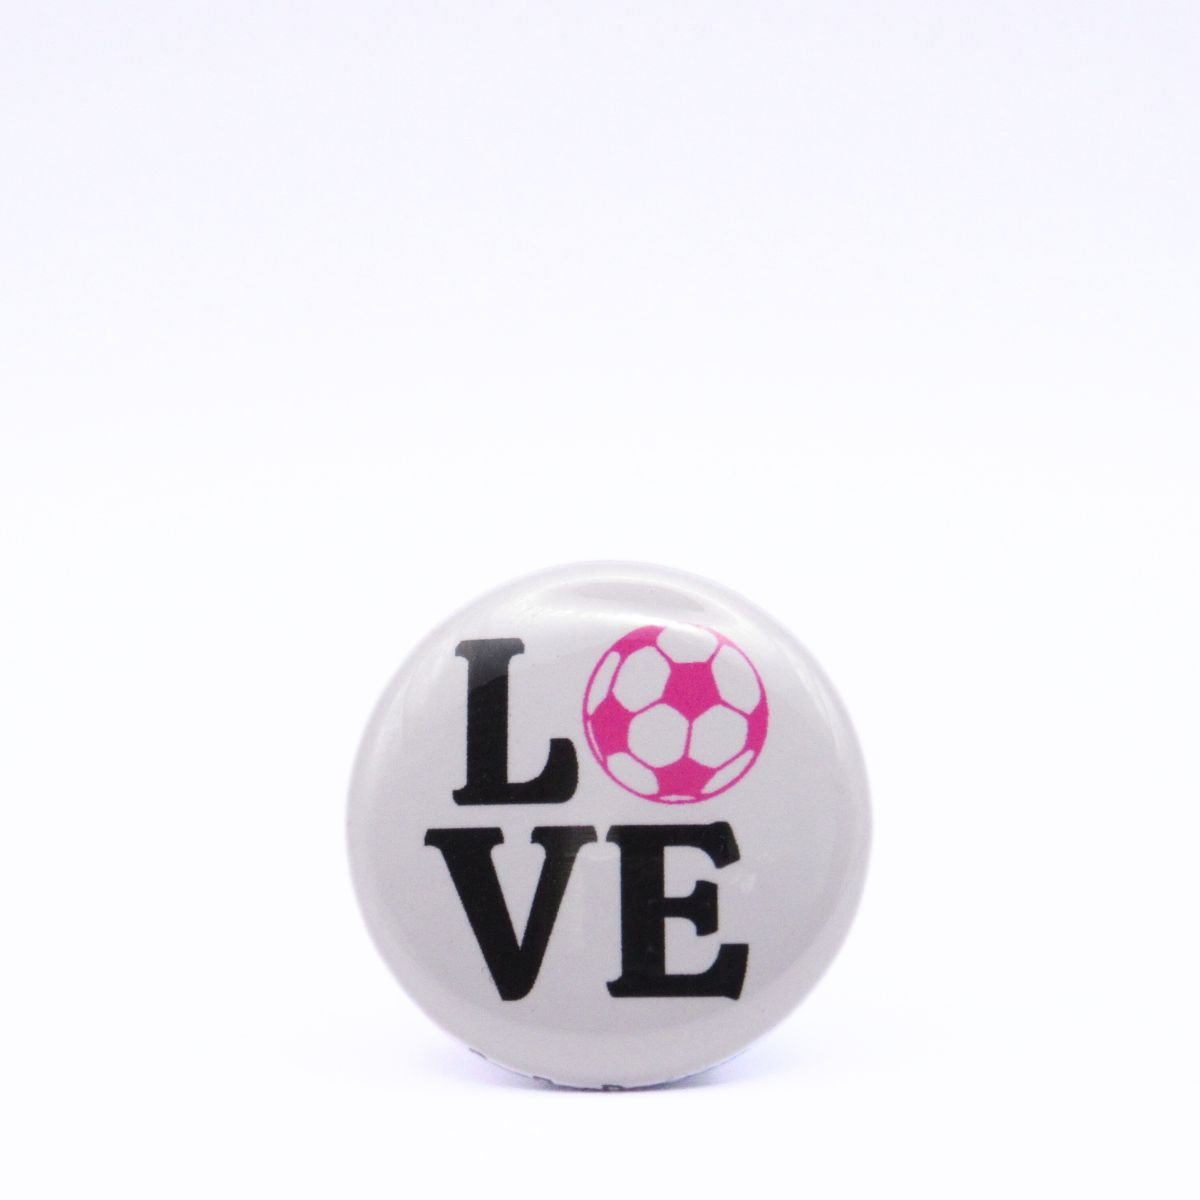 BooBooRoo Pinback Button (i.e. button, badge, pin) displaying the word "Love" with the "O" replaced by a soccer ball. Pink soccer ball with black text.